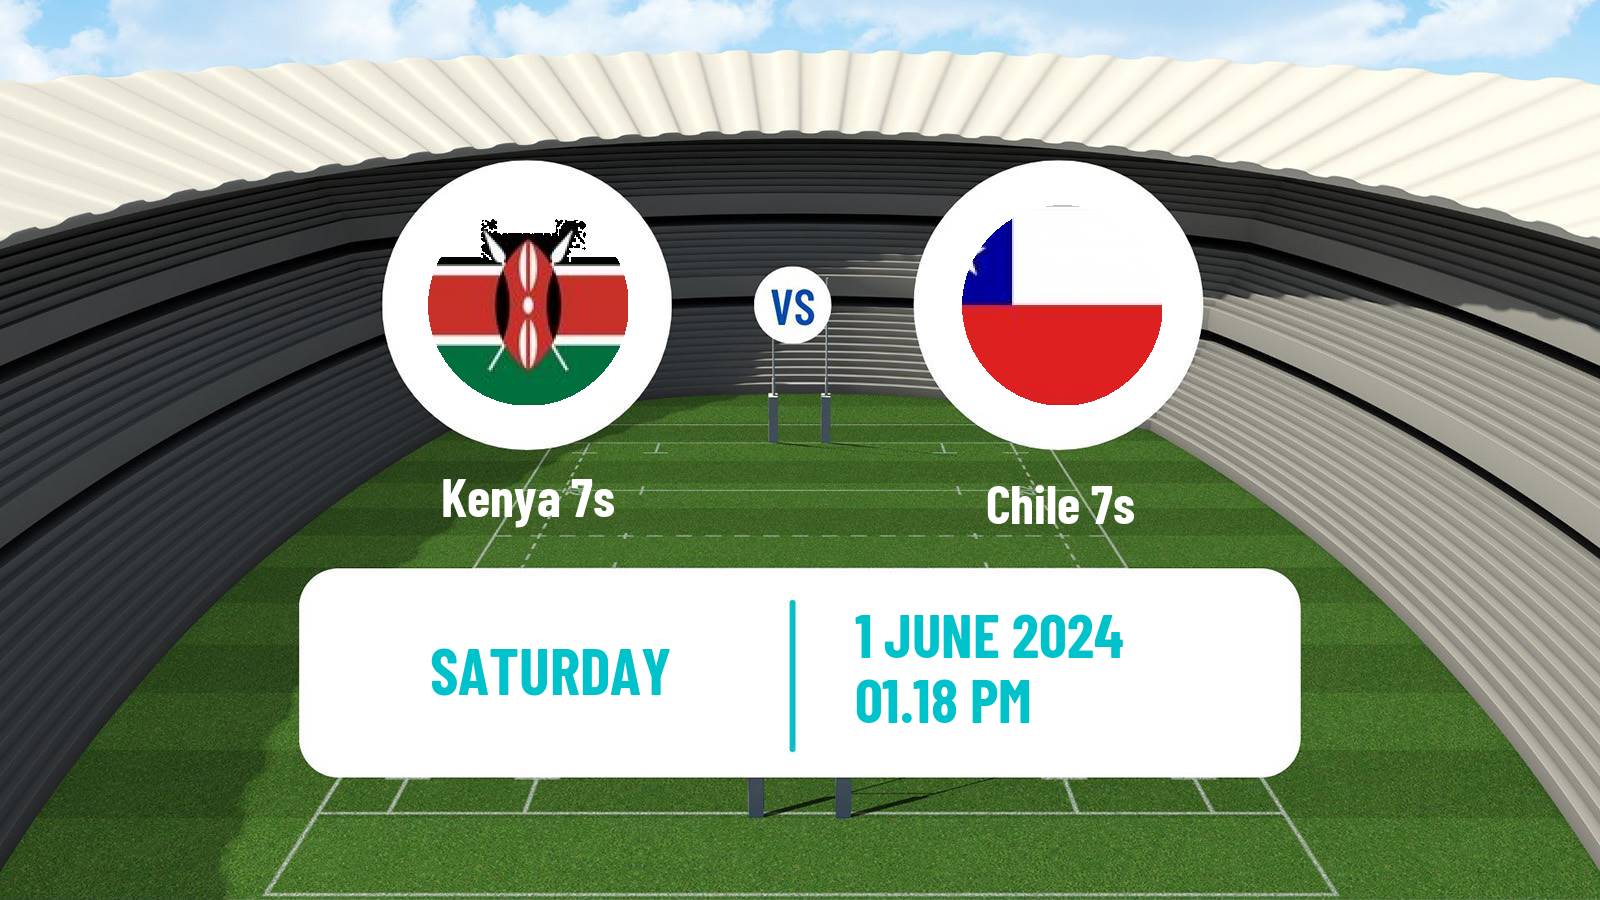 Rugby union Sevens World Series - Spain Kenya 7s - Chile 7s